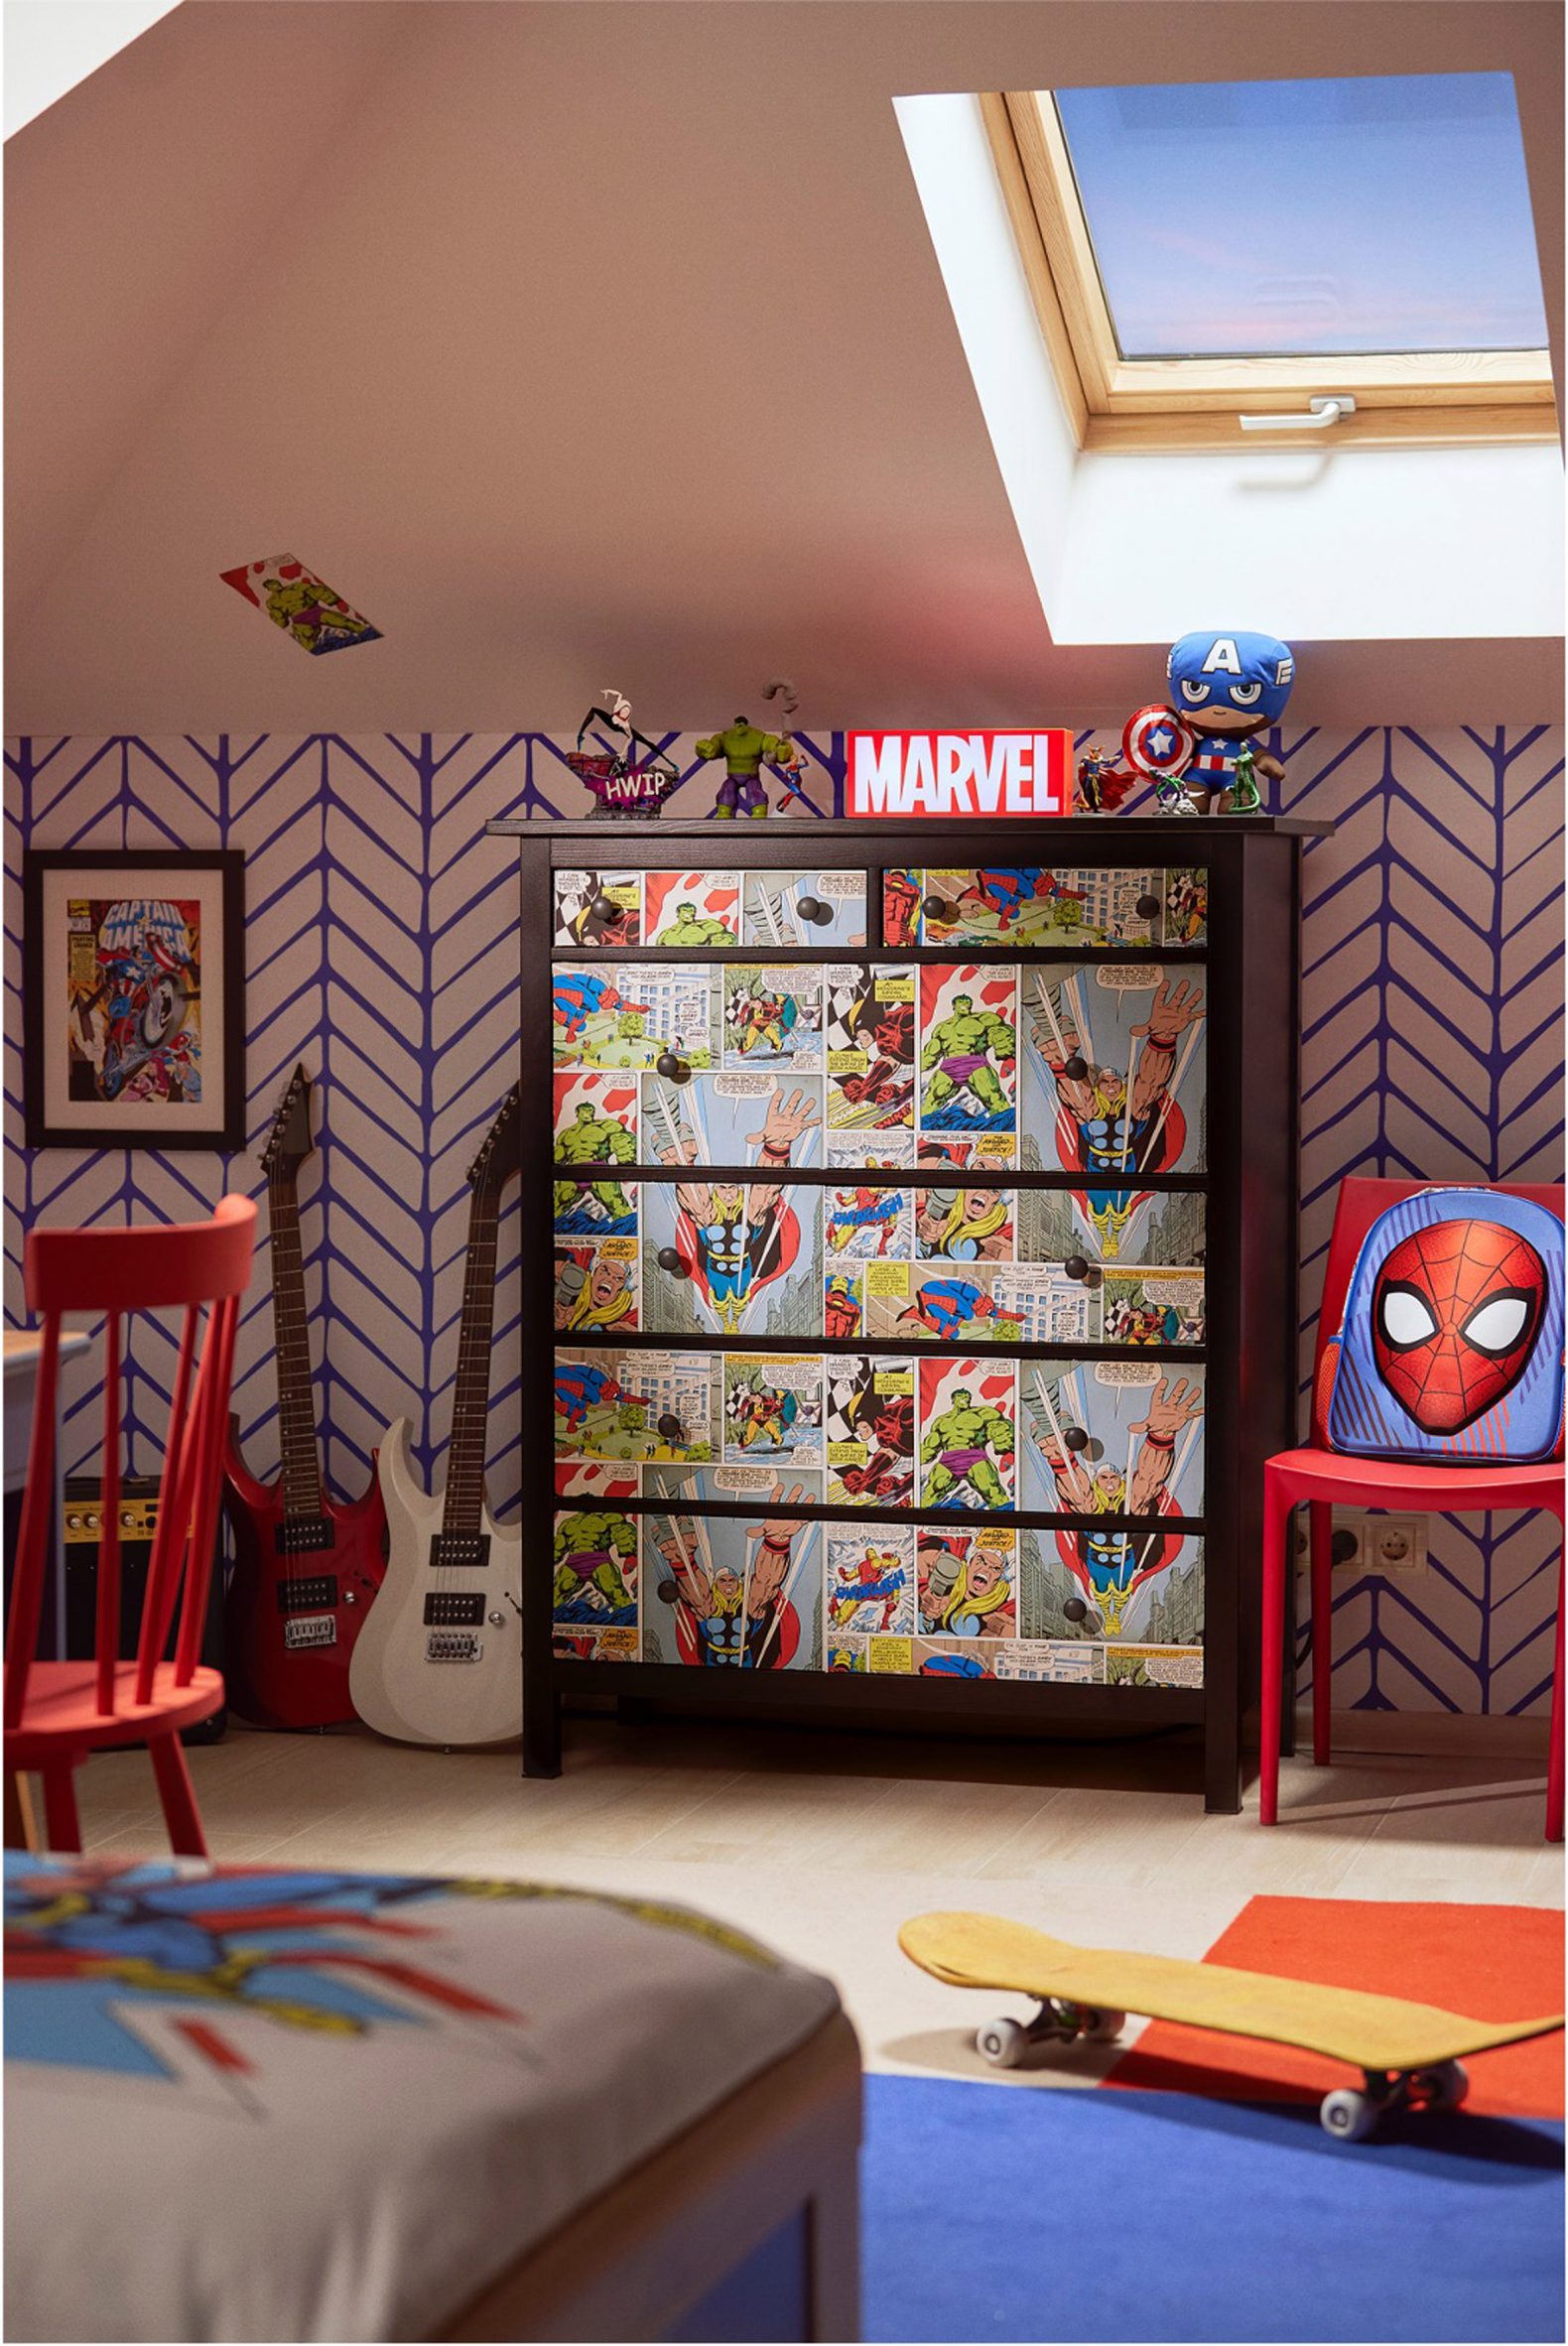 Kids bedroom decorated in Marvel homeware and bedding by Disney Home